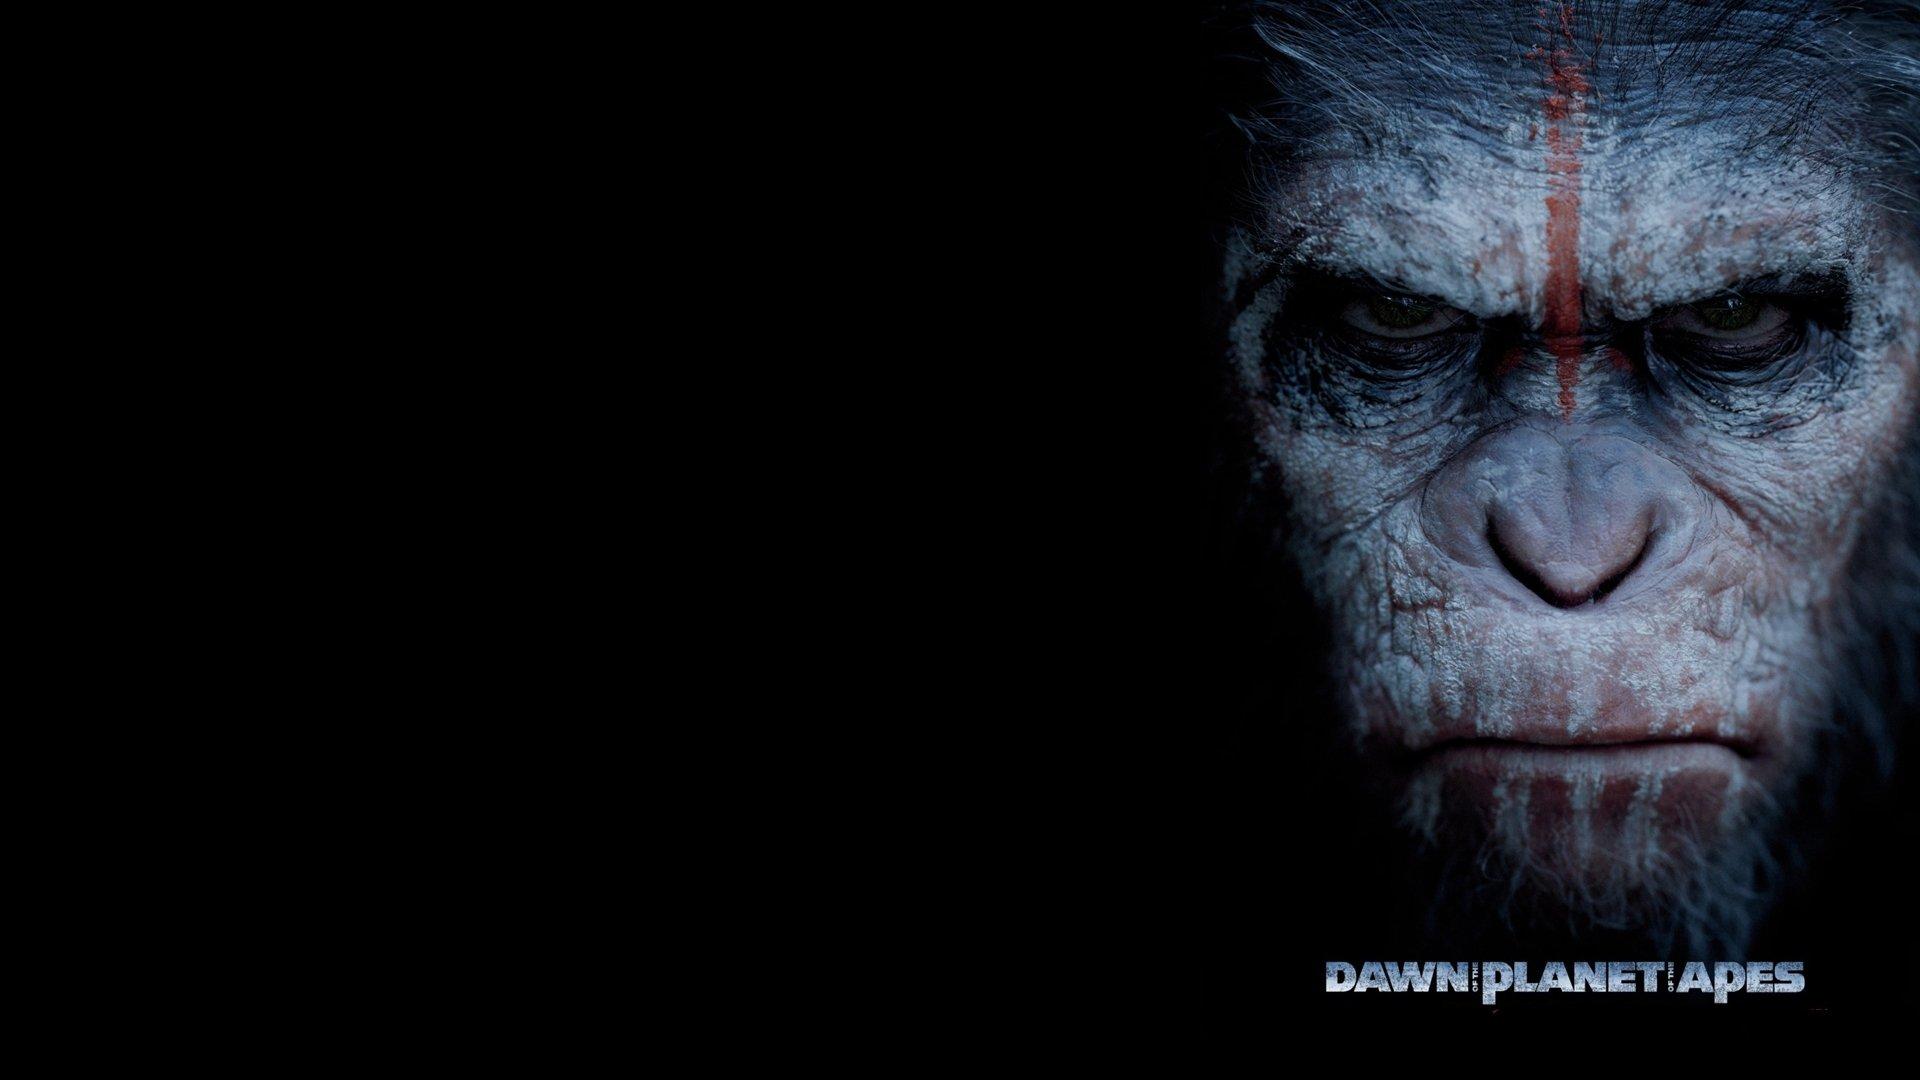 Dawn of the Planet of the Apes HD Wallpaper